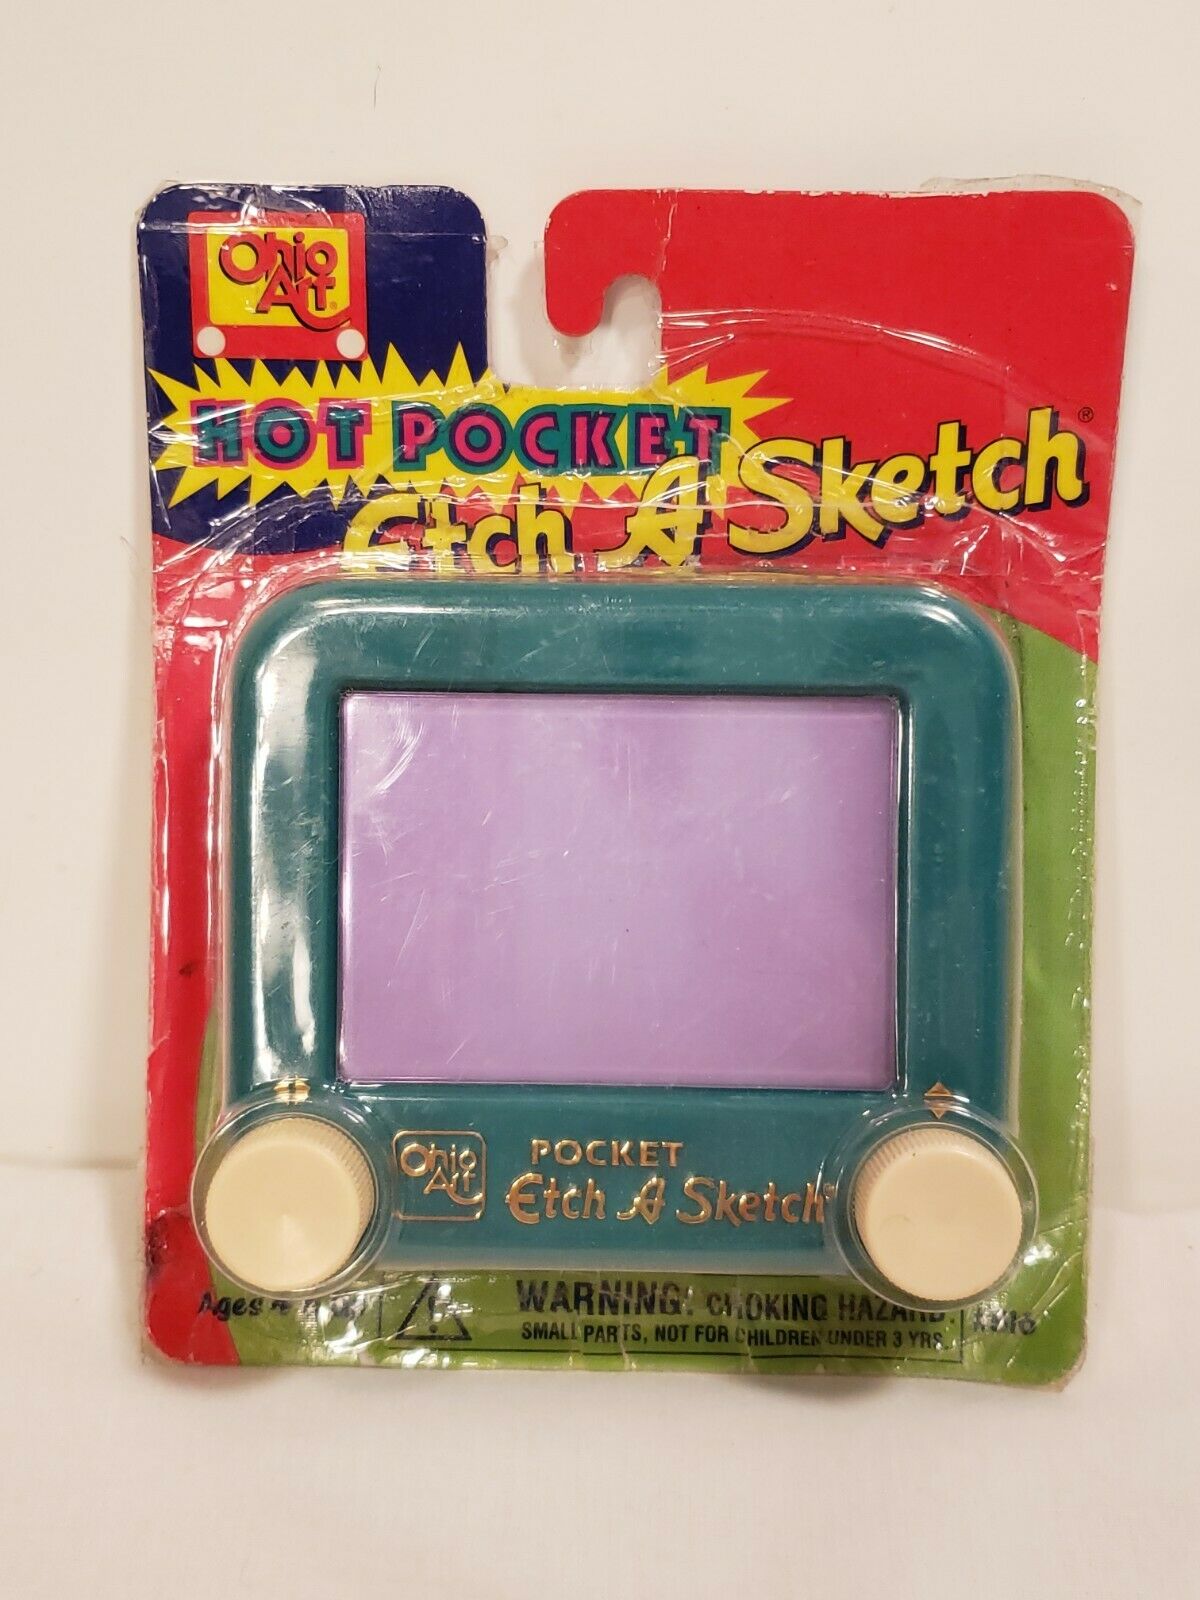 Vintage 1997 Pocket Etch-A-Sketch Ohio Art, Green, w/ Opened Package, Works